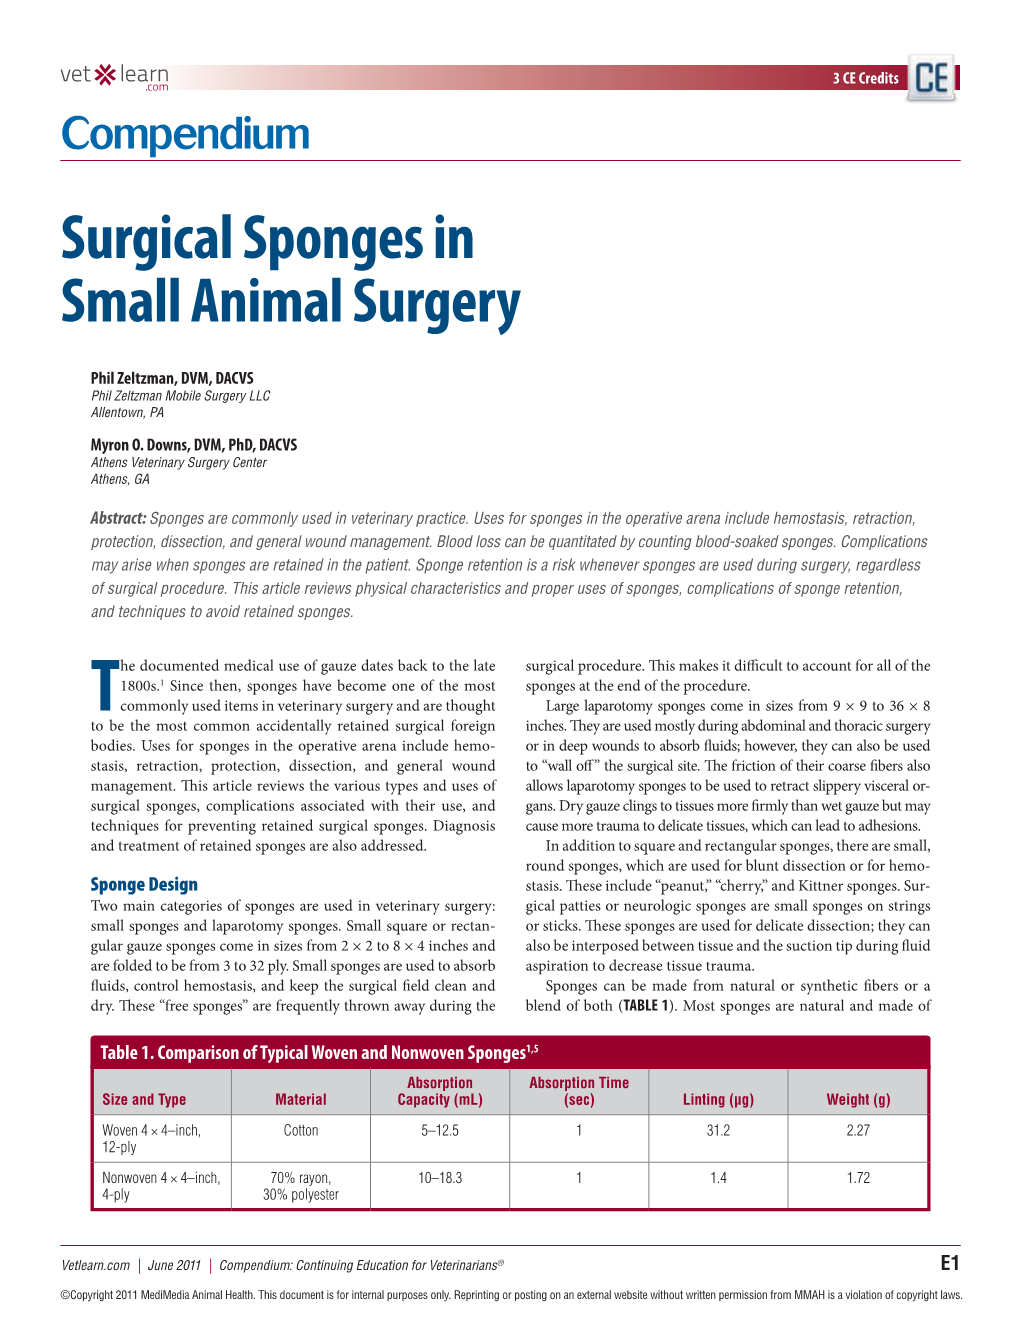 Surgical Sponges in Small Animal Surgery